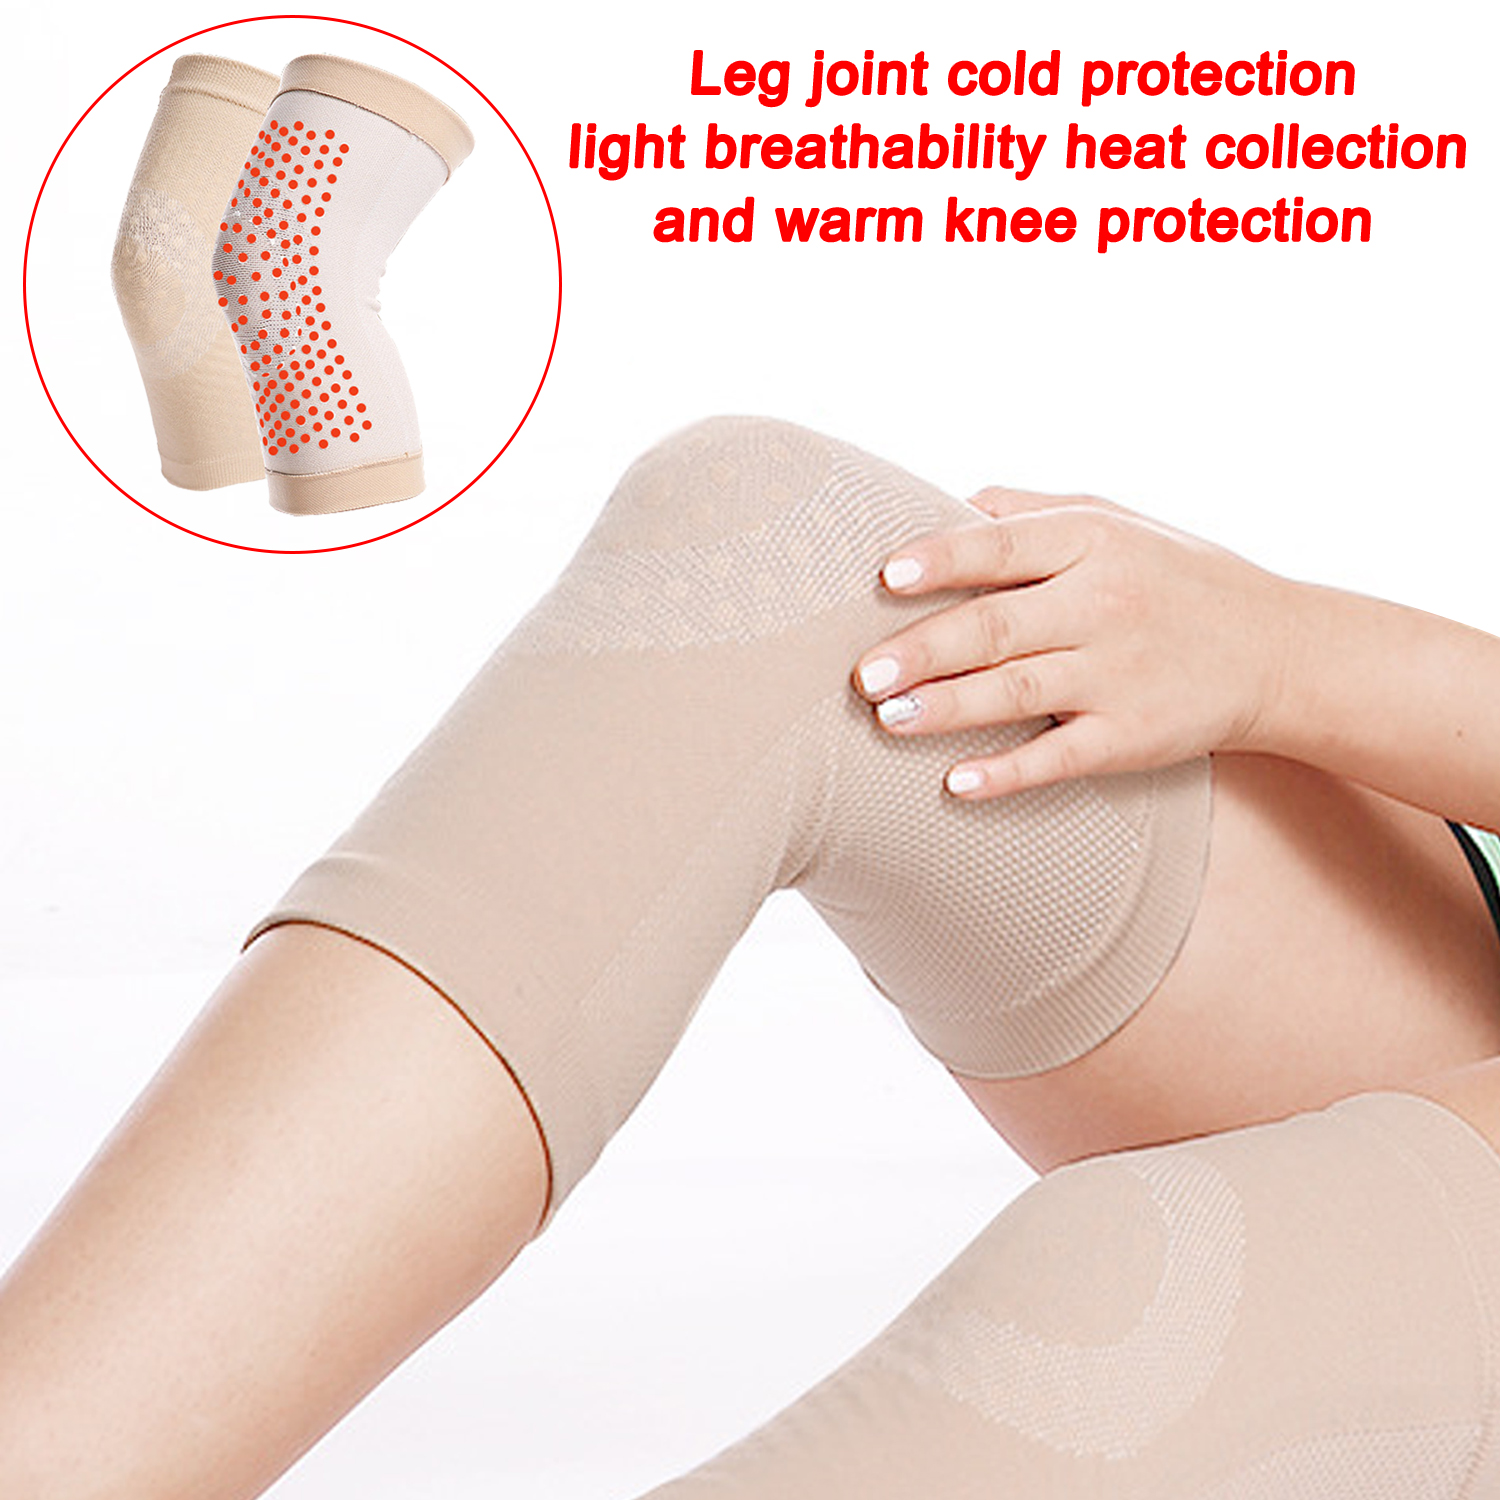 Knee Pads Men And Women Old Men And Old Women Cold Leg Joints Cold-proof Light Breathable Heat-gathering Knee Pads Warm Knee Pads